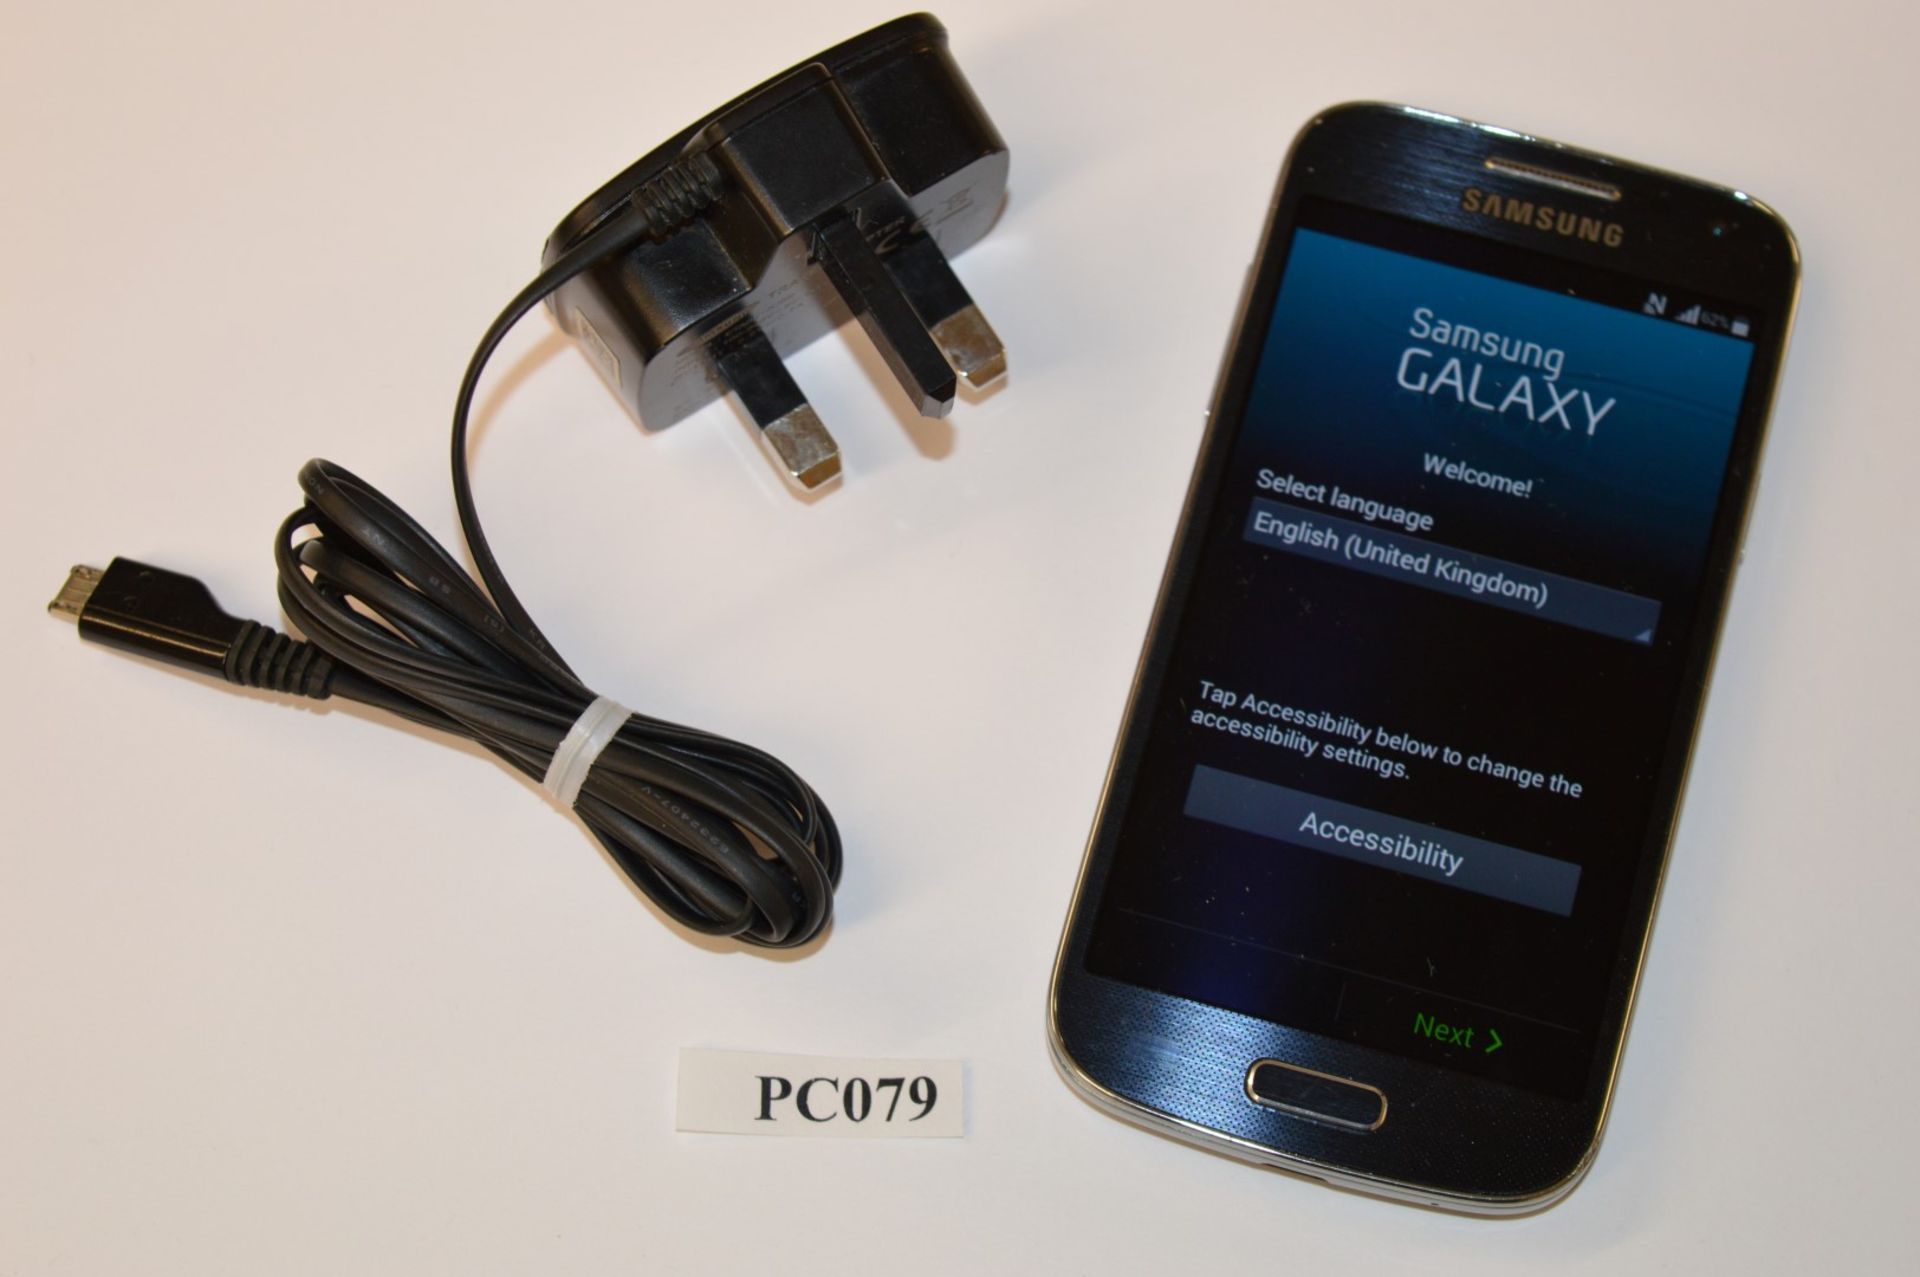 1 x Samsung Galaxy S4 Mini Mobile Phone - Pebble Blue - GT-19195 - Features Dual Core 1.7ghz - Image 2 of 7